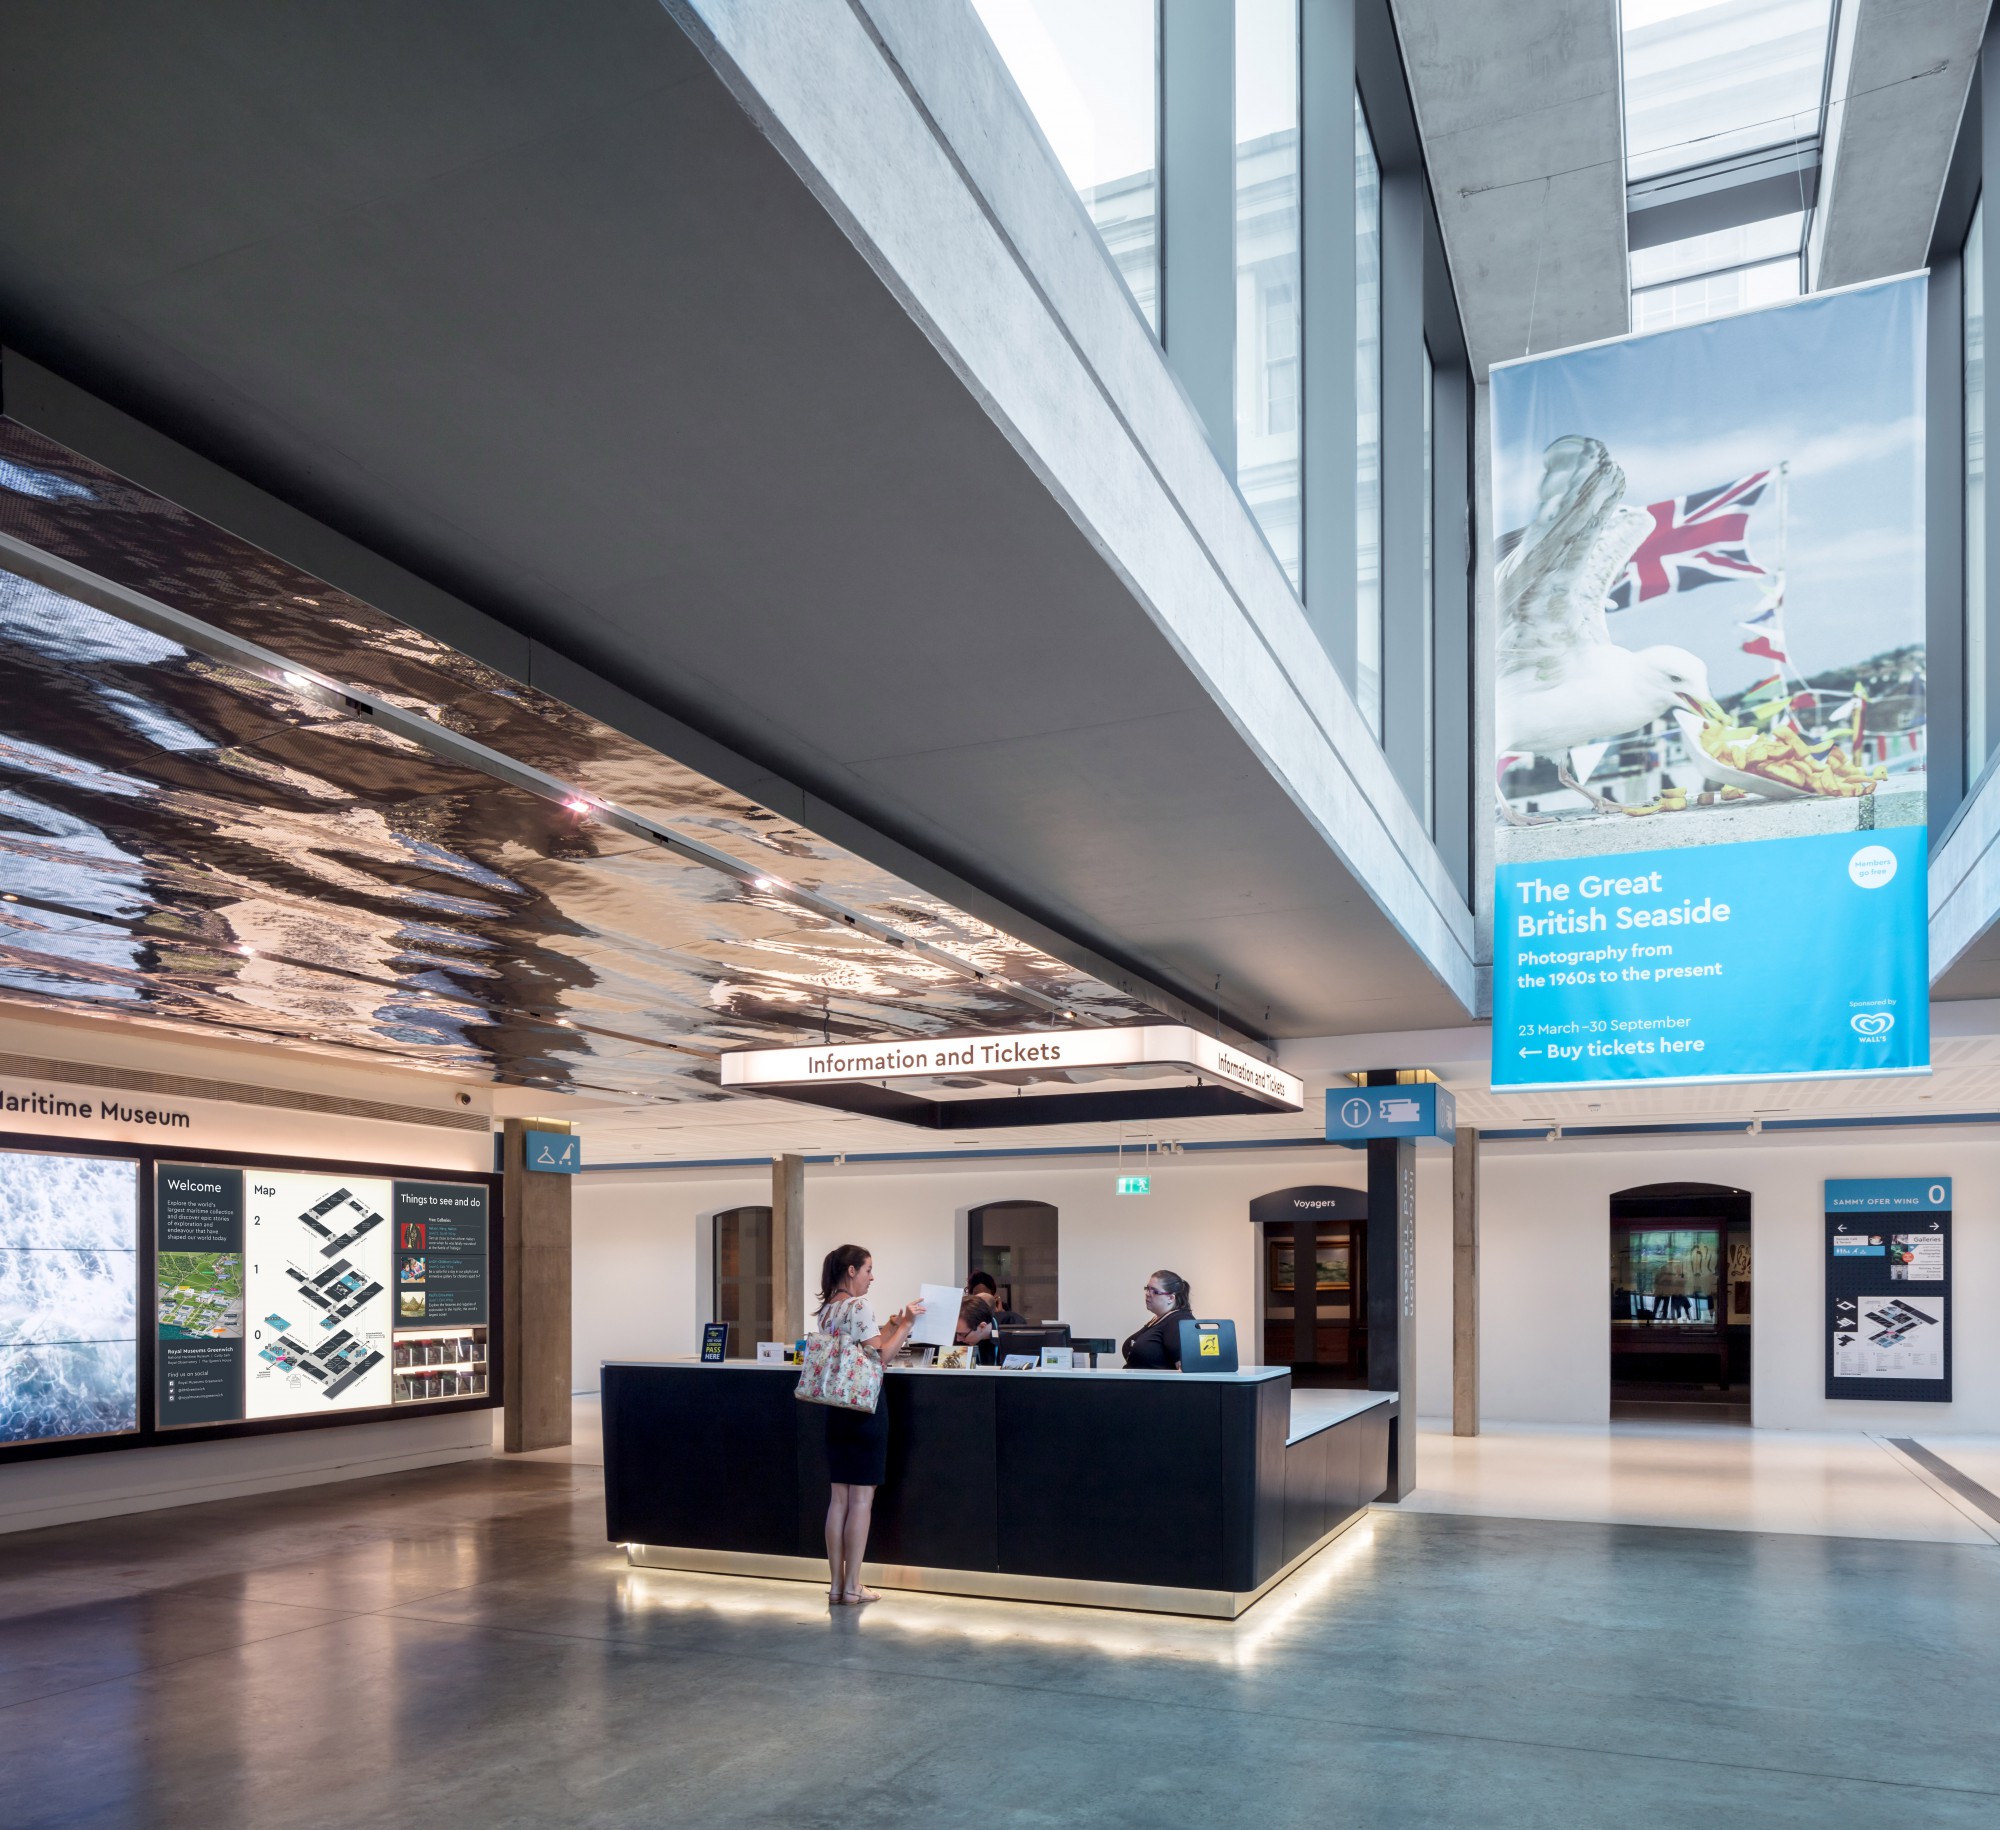 Inside the lobby of the National Maritime Museum. A square, black desk sits in the middle of the room and a member of staff is assisting a visitor in the distance. Maps of the museum floors are to the left, with a banner advertising 'The Great British Seaside' exhibition to the right. All elements are industrial in feel.